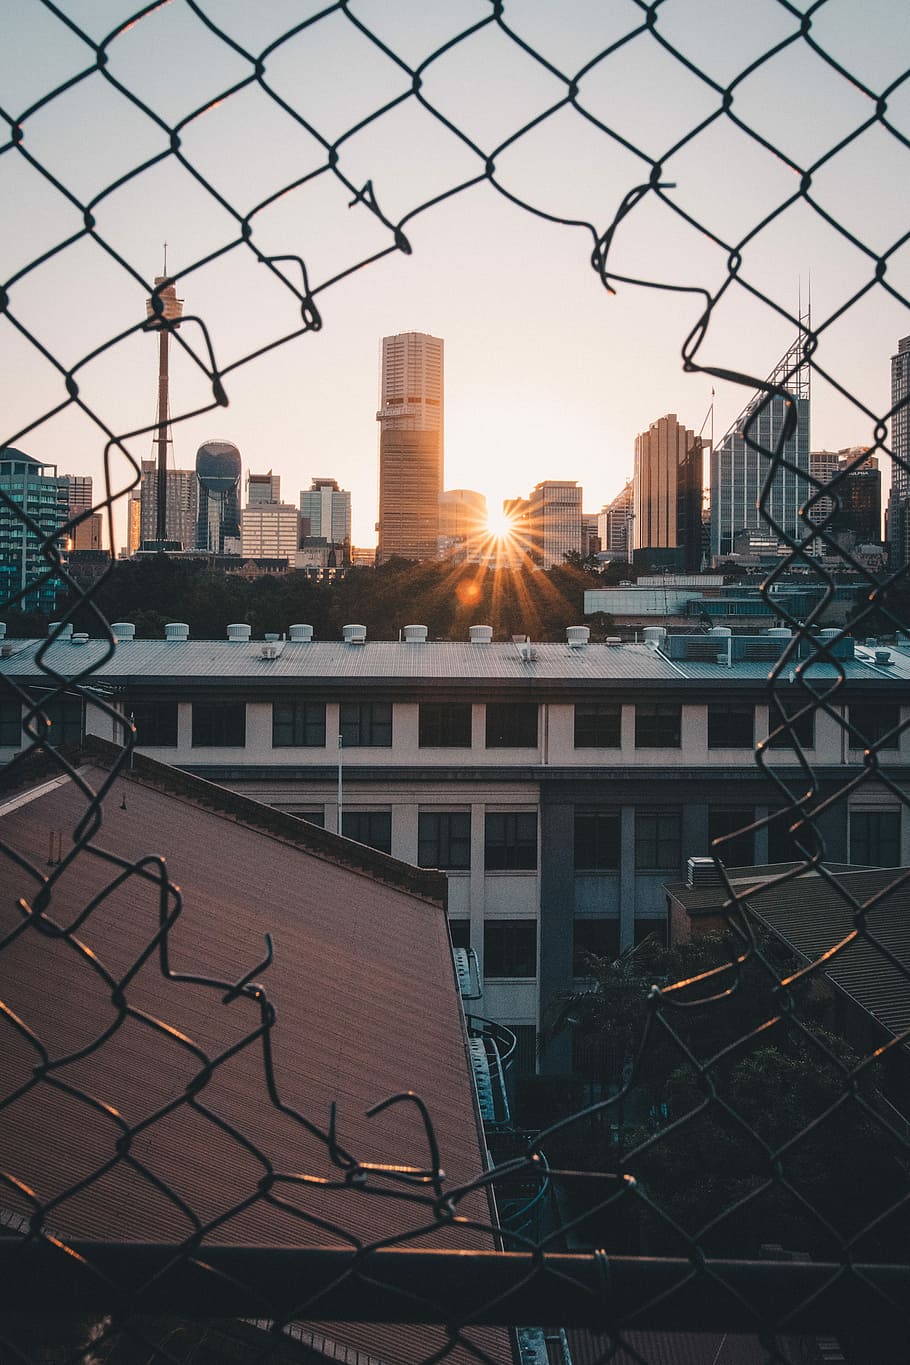 viewing sunset through cyclone fence, gray metal chain-link fence with high-rise building view during sunset, HD wallpaper